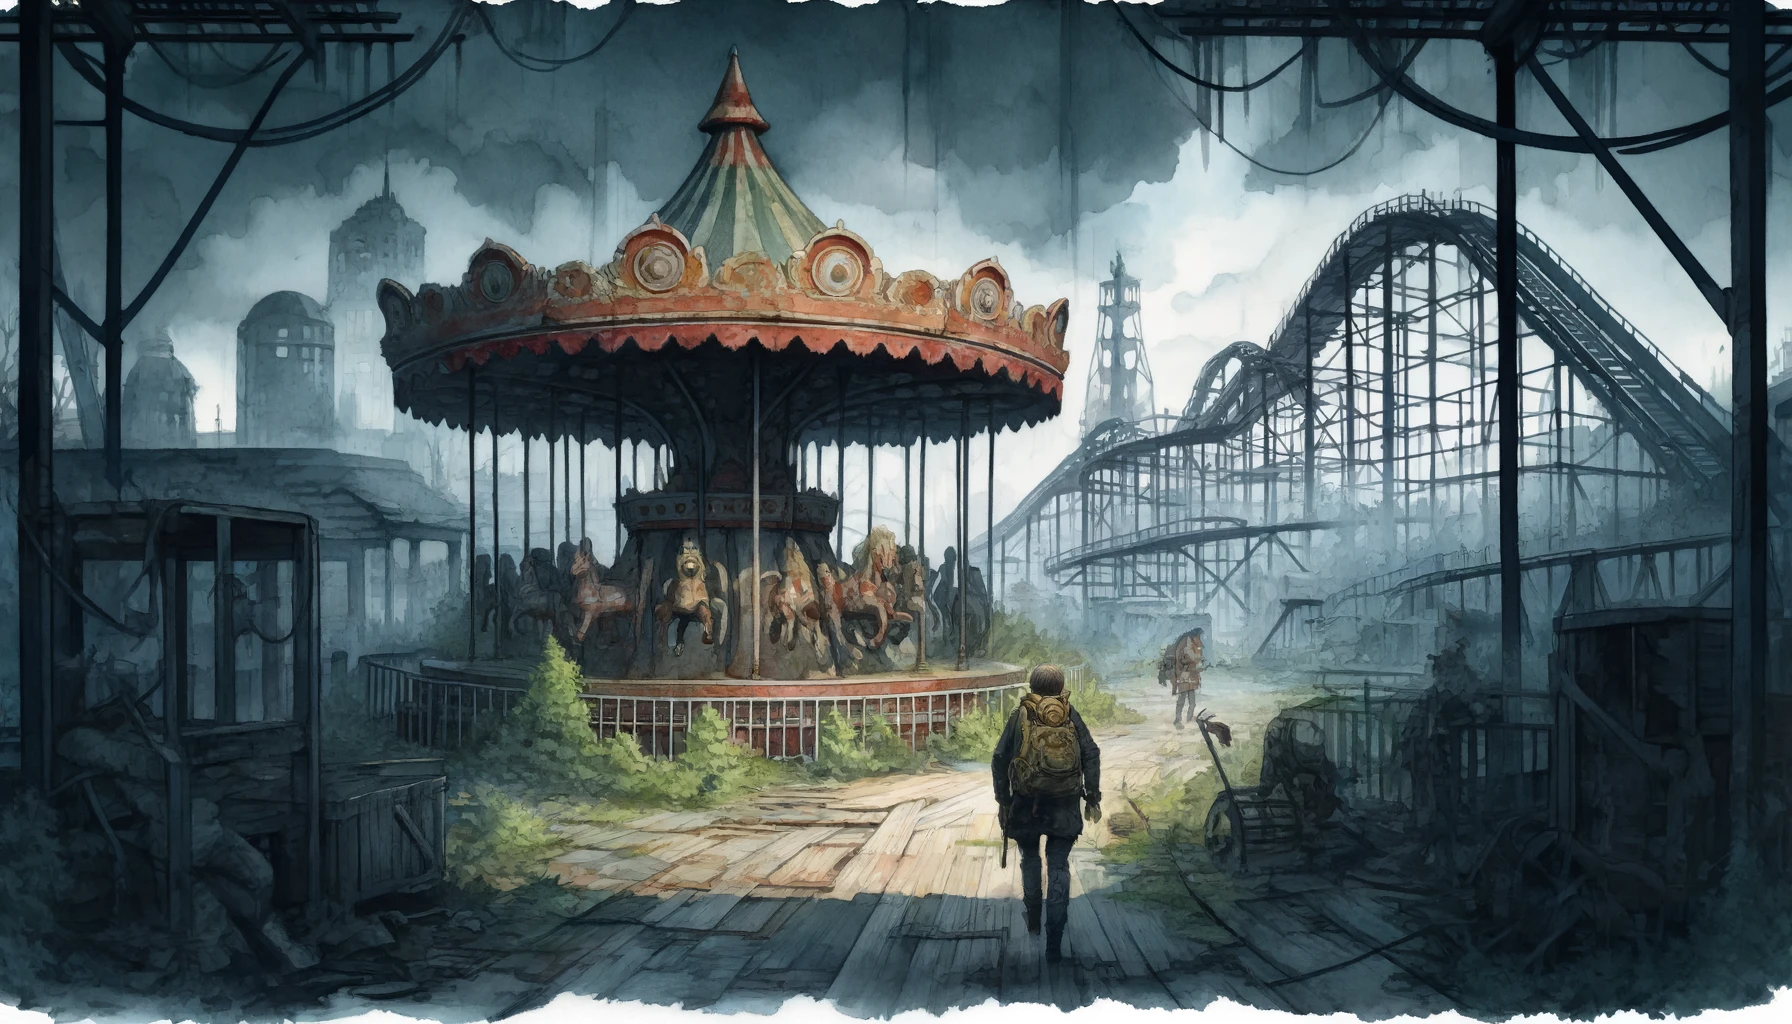 The scene depicts adventurers exploring an eerie, abandoned theme park with dilapidated rides and overgrown pathways. One character examines an old, rusted carousel, with dark, foreboding clouds and the faint outline of a once-grand roller coaster in the background.